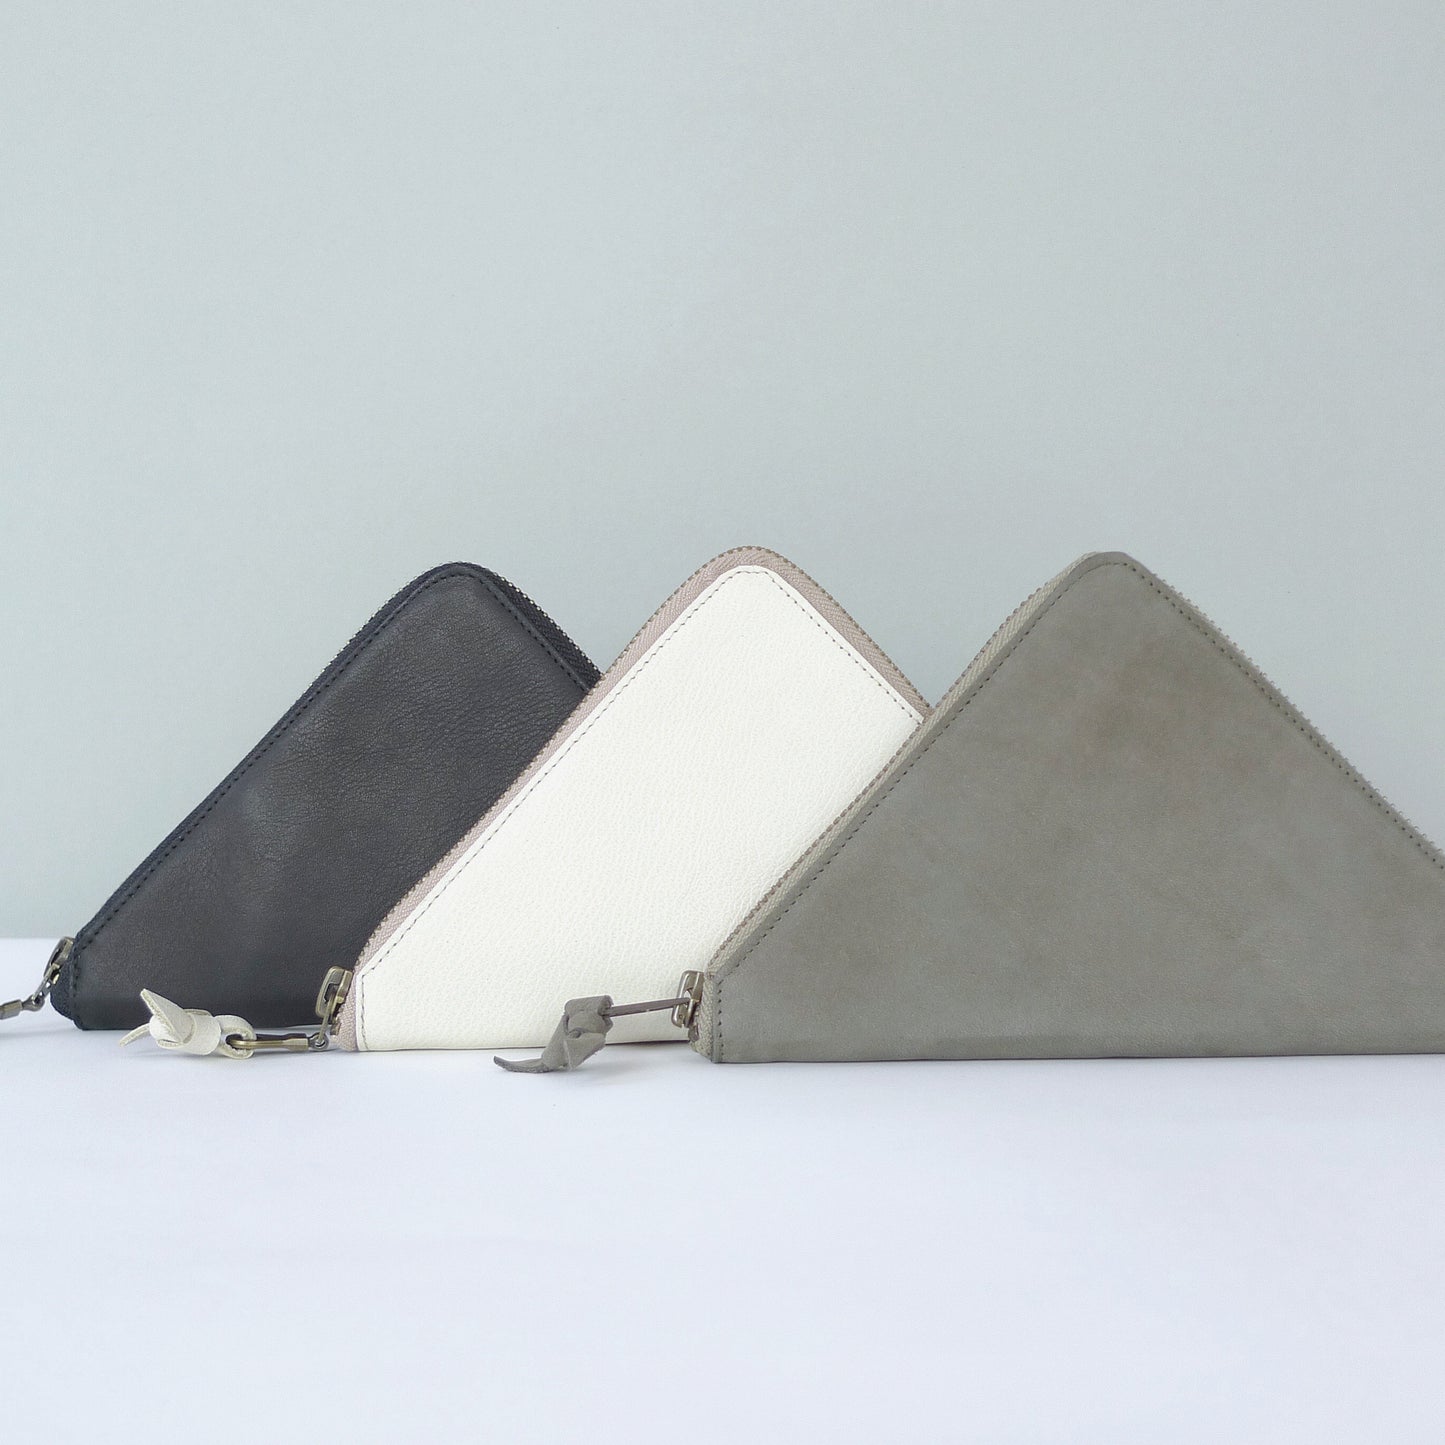 Triangle zip wallet - grey suede leather